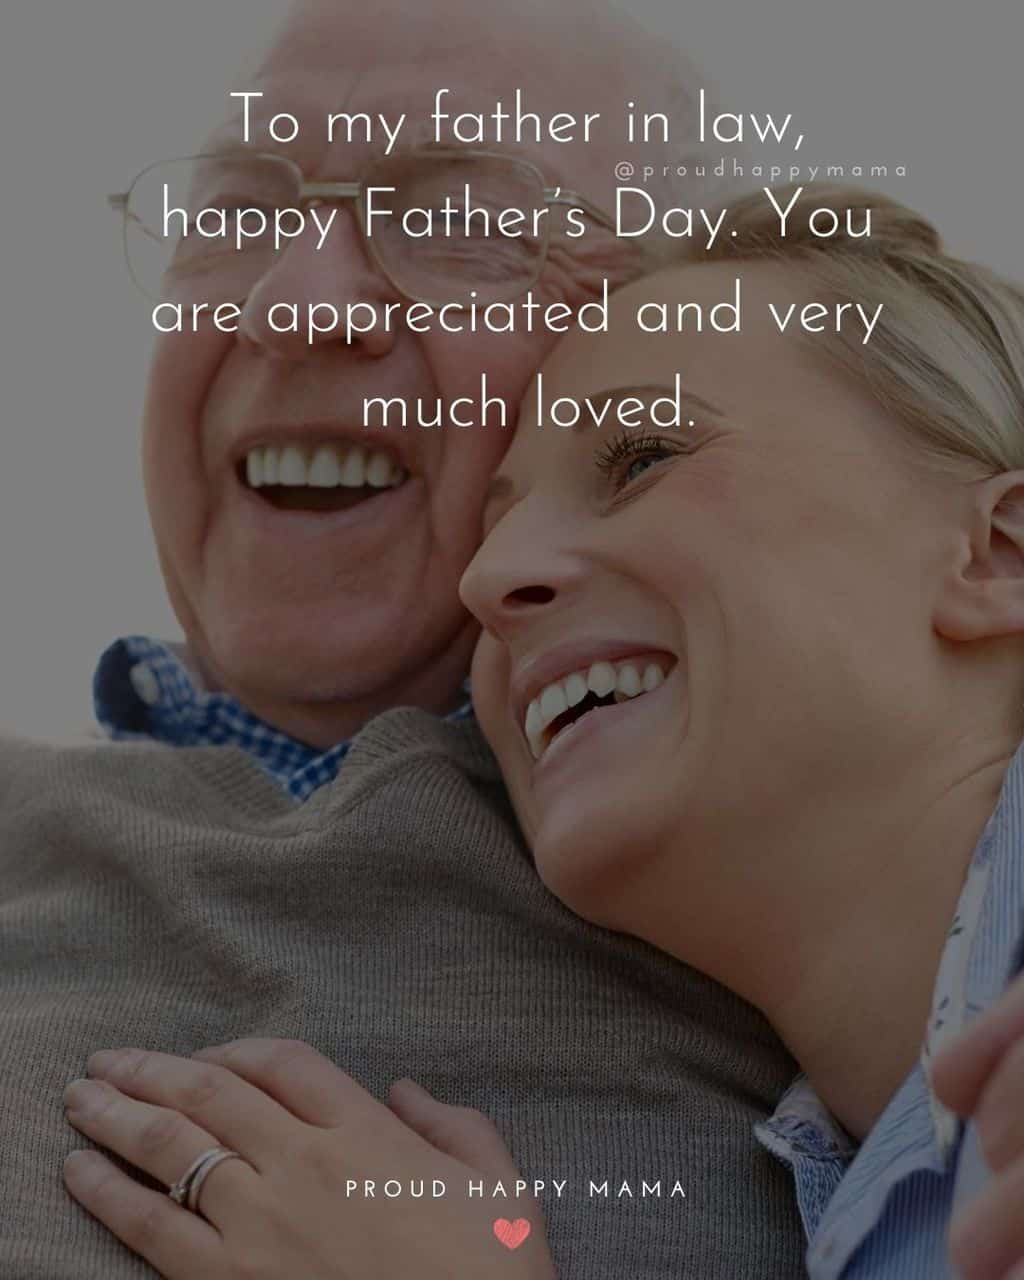 Happy Fathers Day Quotes For Father In Law - To my father in law, happy Father’s Day. You are appreciated and very much